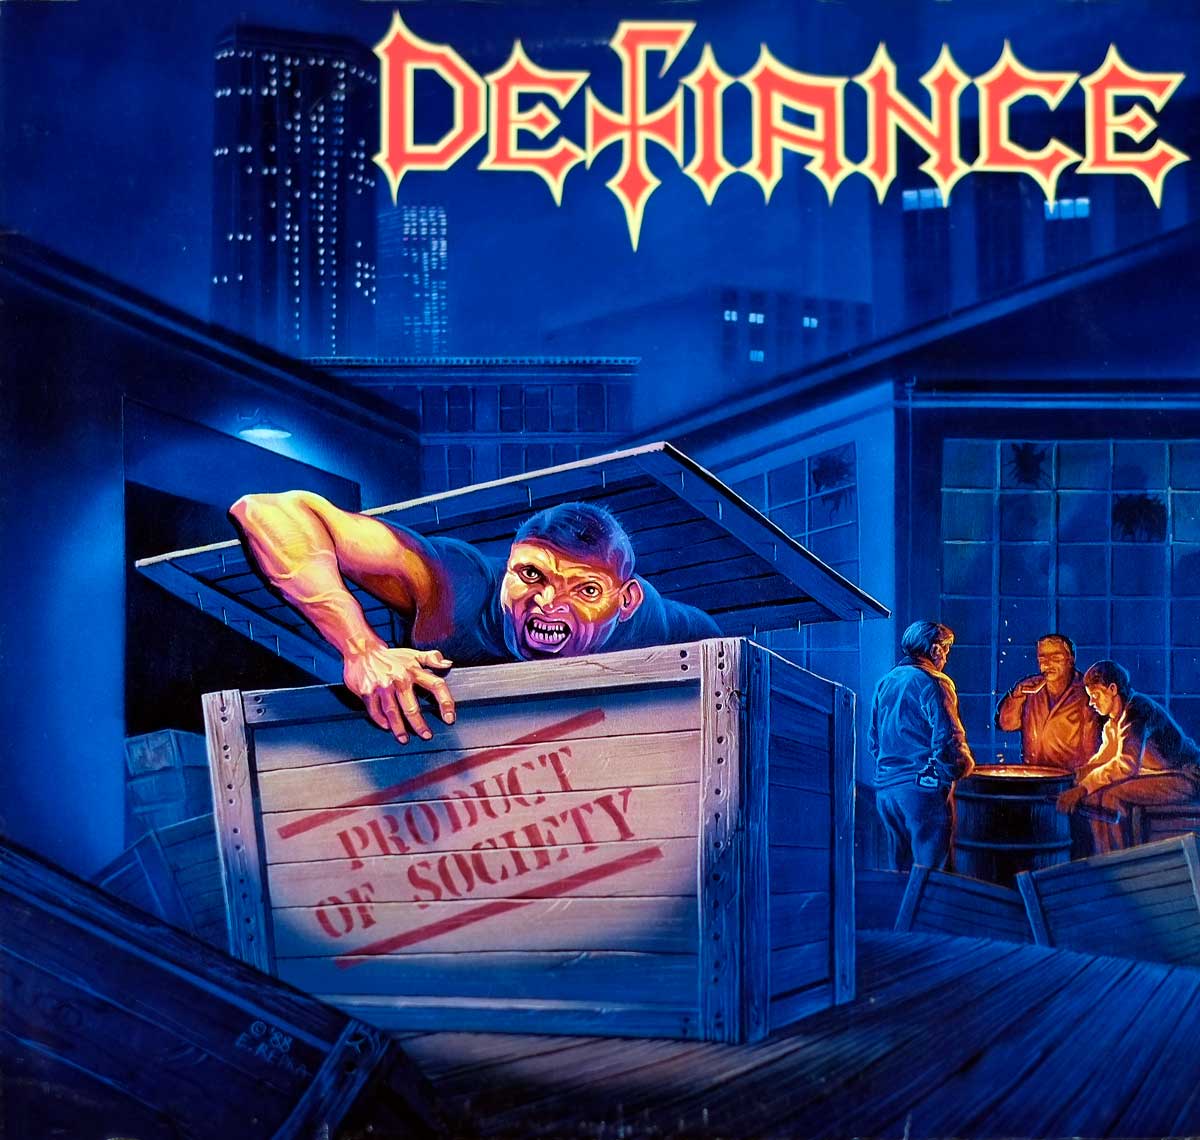 High Quality Photo of Album Front Cover  "DEFIANCE - Product of Society"